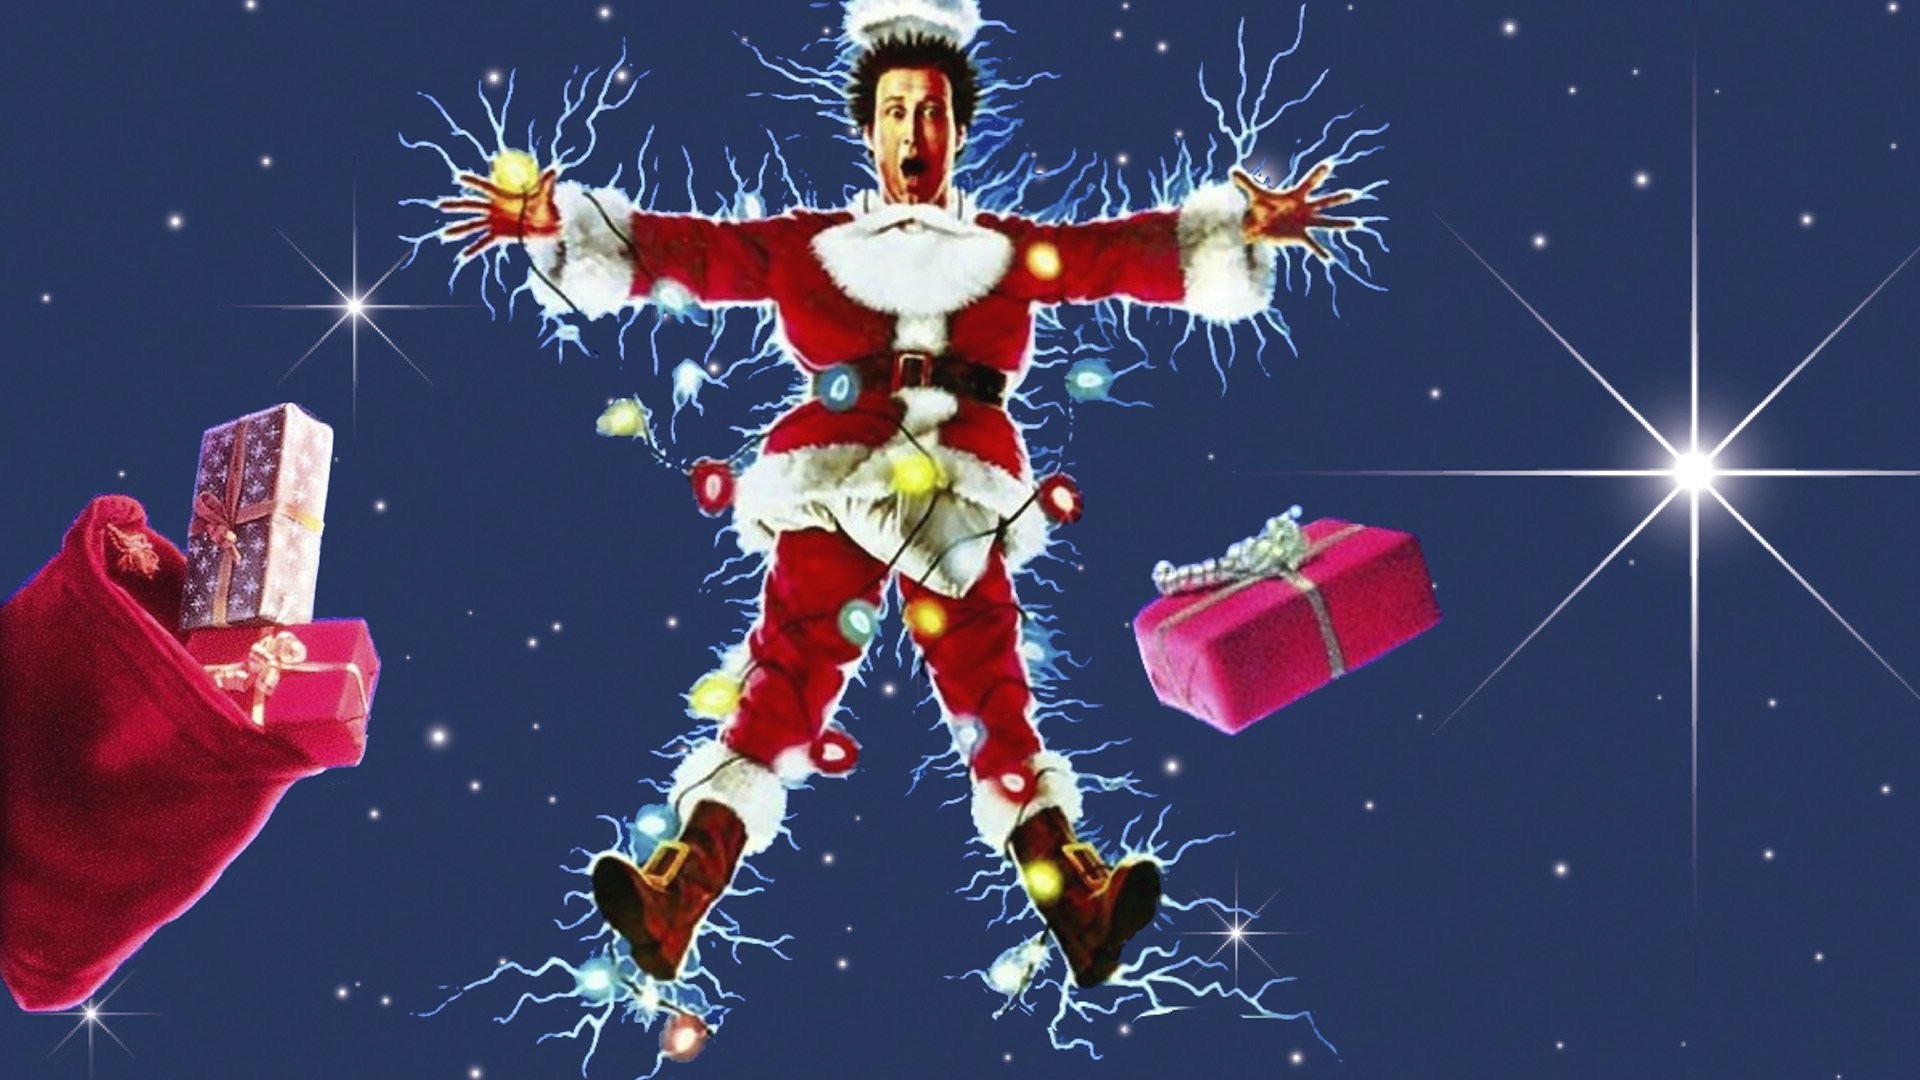 1920x1080 National Lampoon's Christmas Vacation